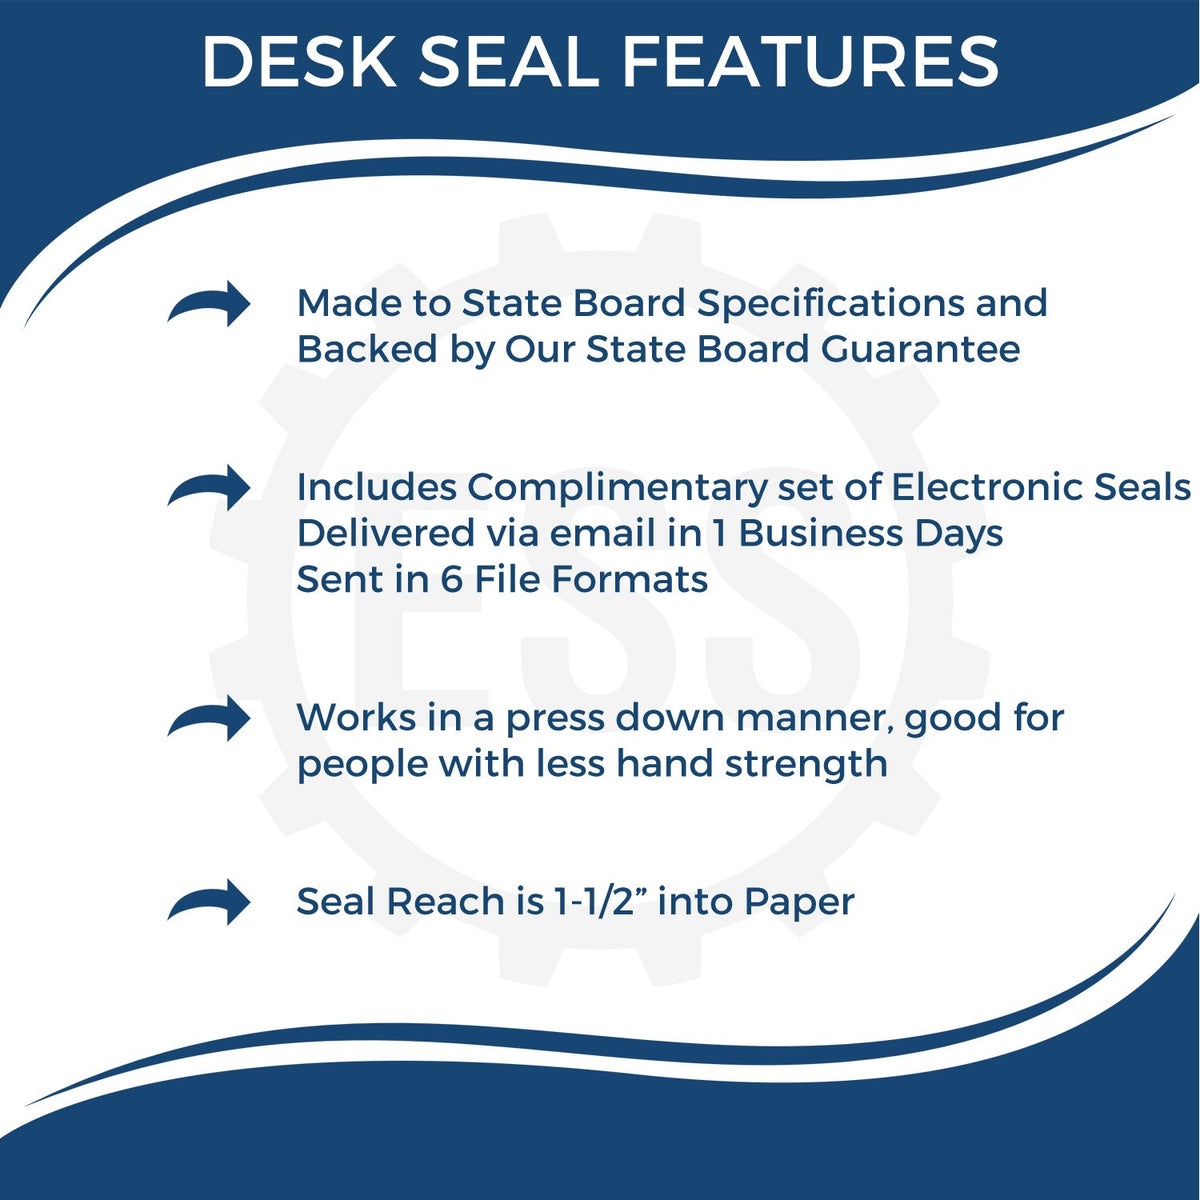 A picture of an infographic highlighting the selling points for the Ohio Engineer Desk Seal